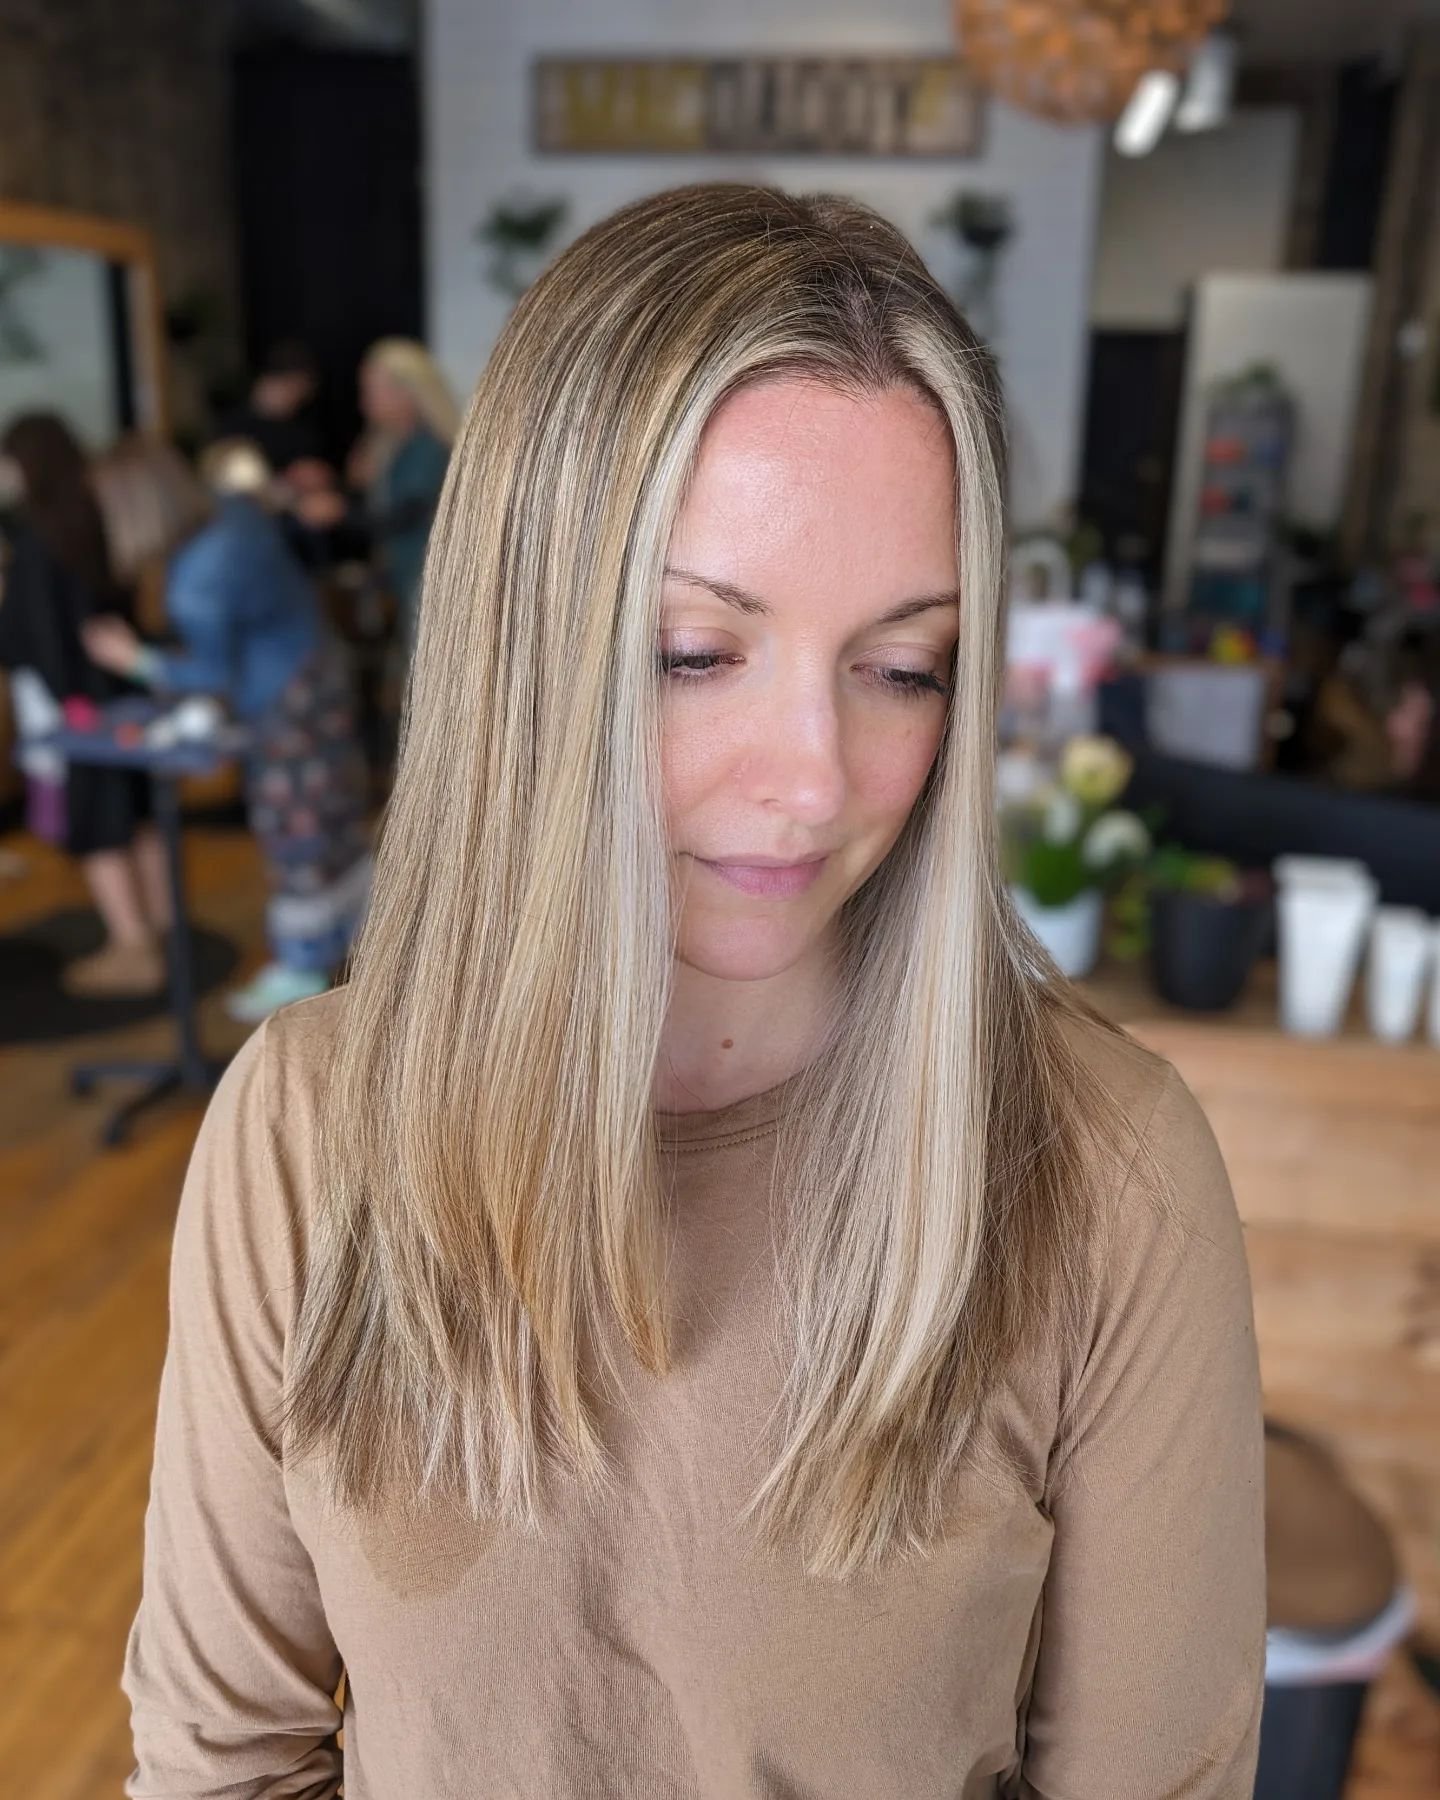 A blonde highlight refresh to start the weekend off right!
Color + Cut by @laura_macdaddysalon 

&bull;

&bull;

&bull;

#blondehighlight #forestparkil